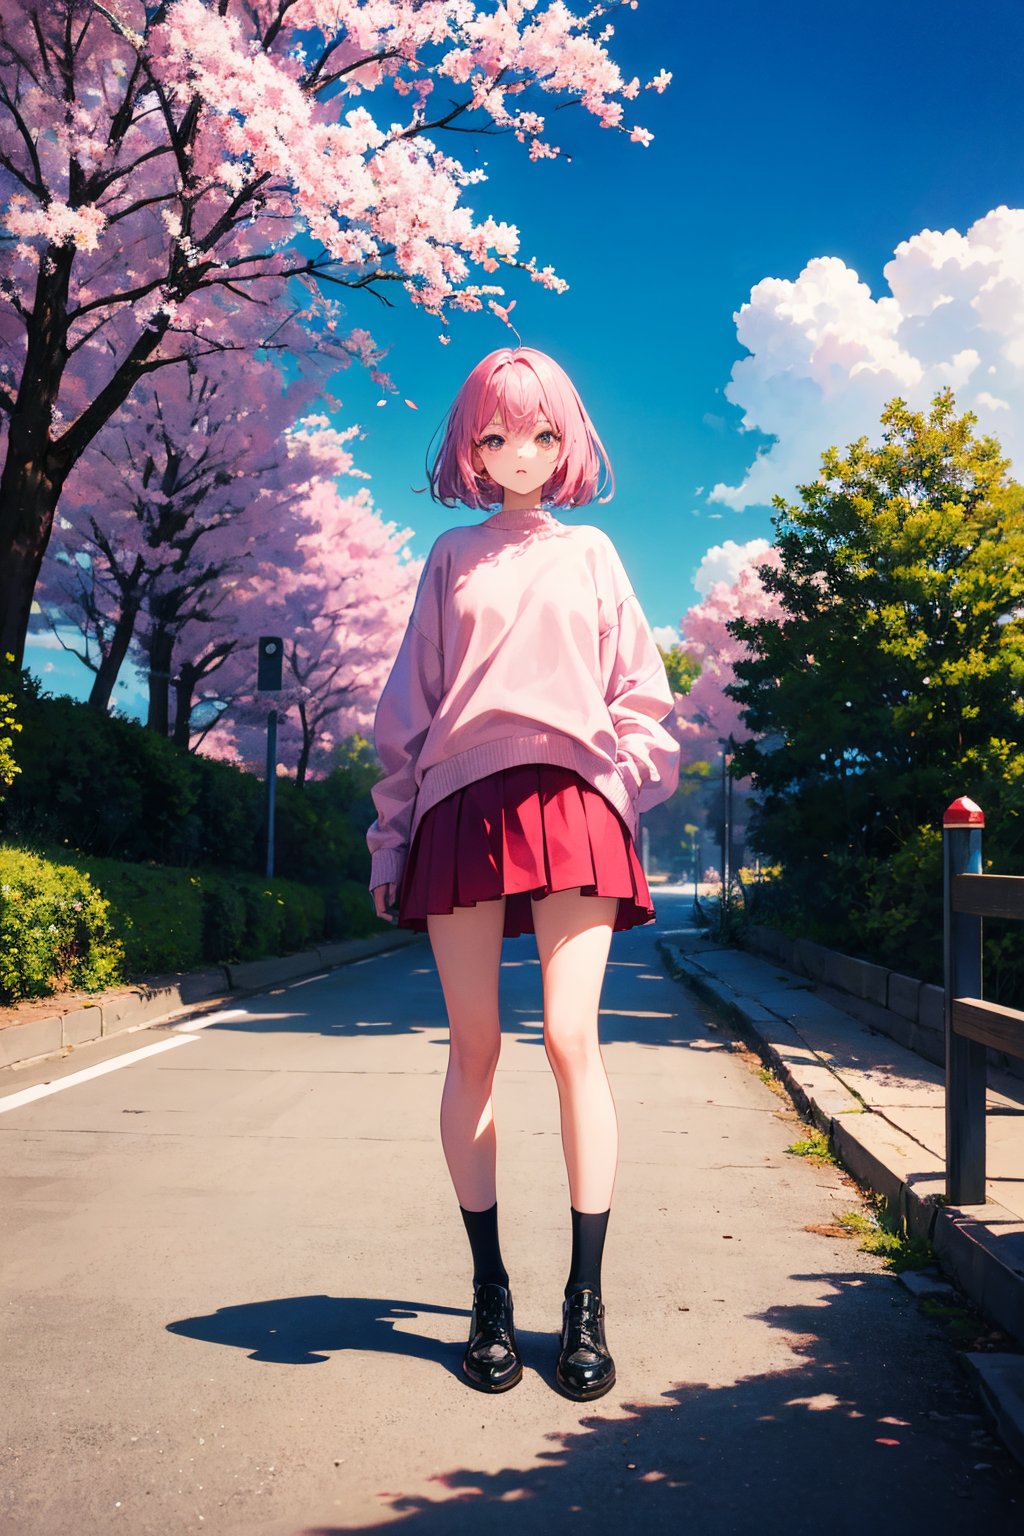 masterpiece, best quality, ultra-detailed, illustration, wide angle, 1girl stand in the middle of road, solo, road in the middle and pink cherry trees on roadside, full body, 20 yo, pink hair, sweater, short skirt, fashion,, composition, balance, harmony, rhythm, color, light, shadow, reflection, refraction, tone, contrast, foreground, middle ground, background, naturalistic, figurative, representational.